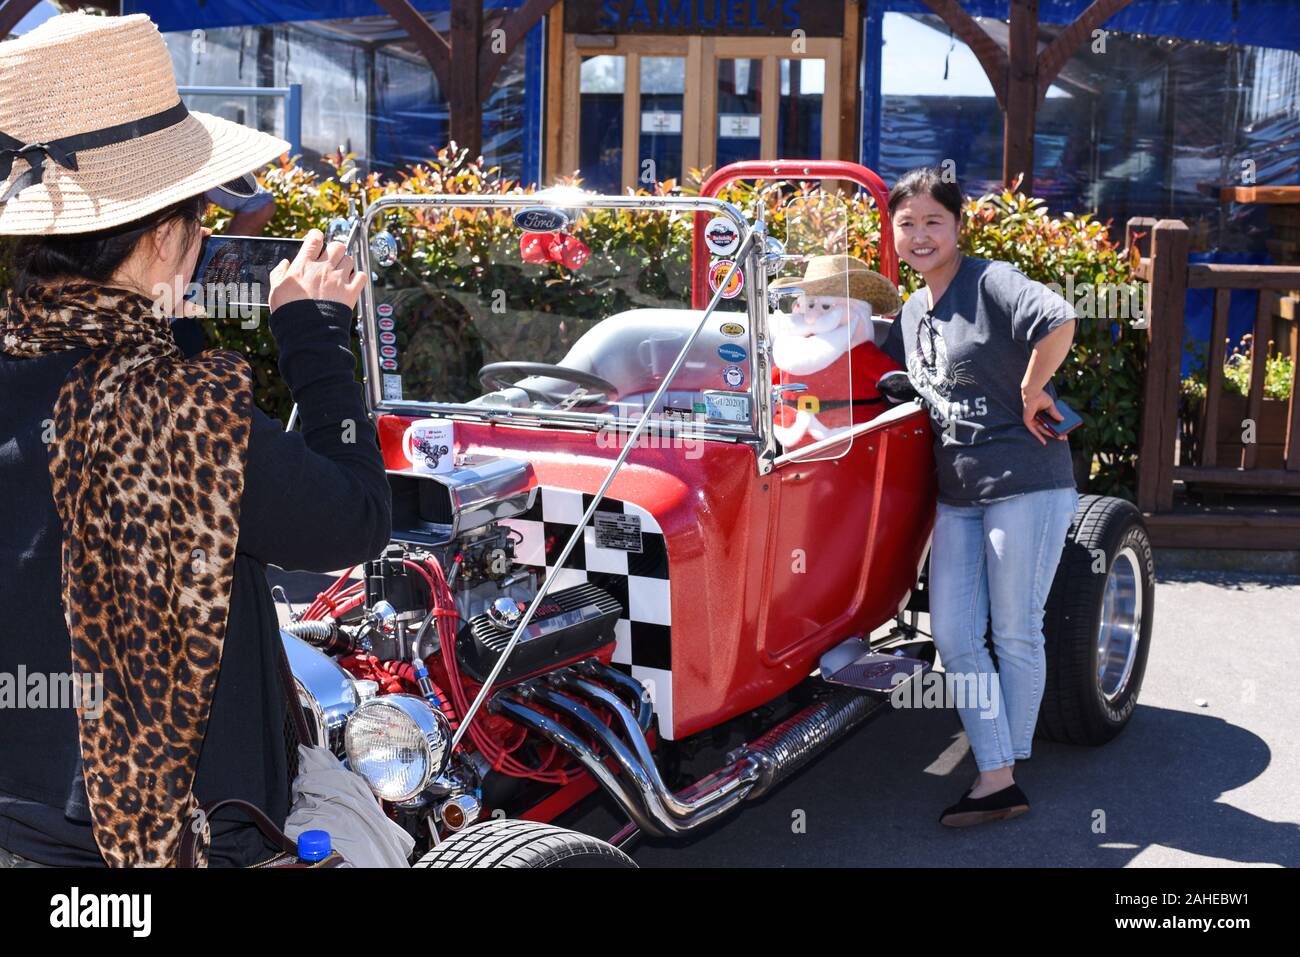 Methven, New Zealand. 28th Dec 2019. Posing for a selfie with a Santa Claus in a car at a gathering of hot rods and other custom cars on the southern island of New Zealand Stock Photo